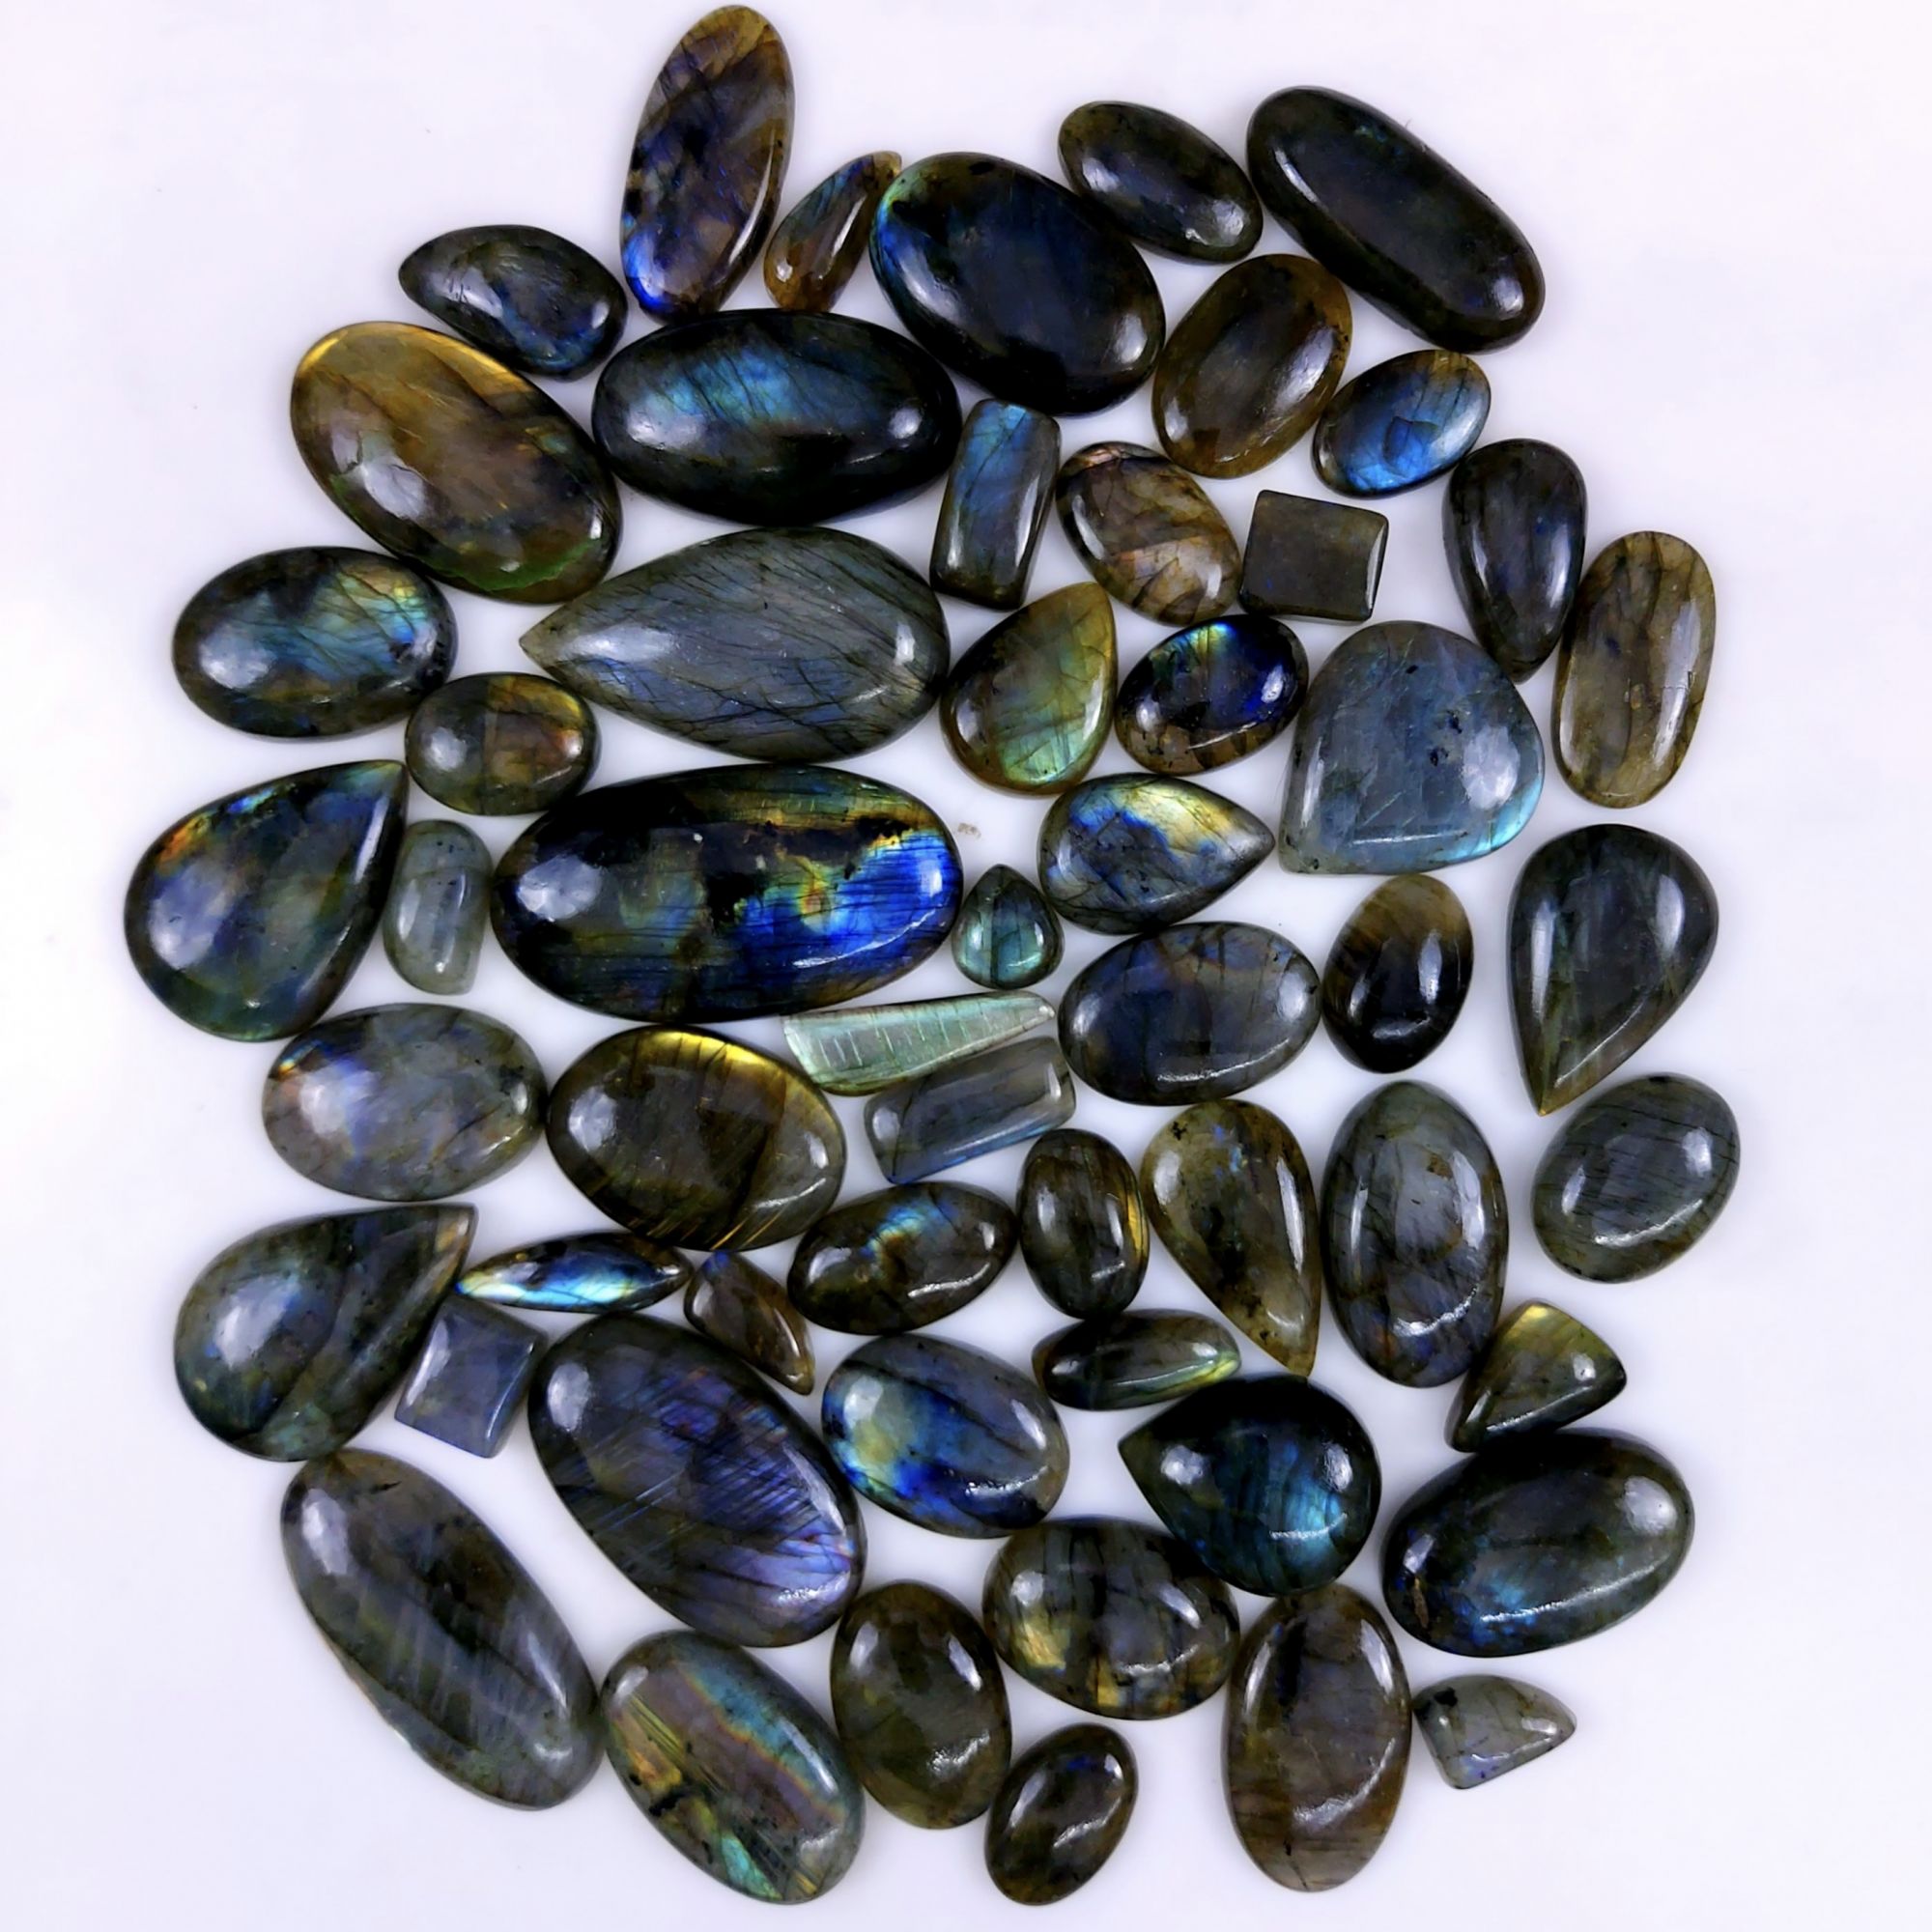 55pc 1757Cts Labradorite Cabochon Multifire Healing Crystal For Jewelry Supplies, Labradorite Necklace Handmade Wire Wrapped Gemstone Pendant 48x26 18x14mm#6348